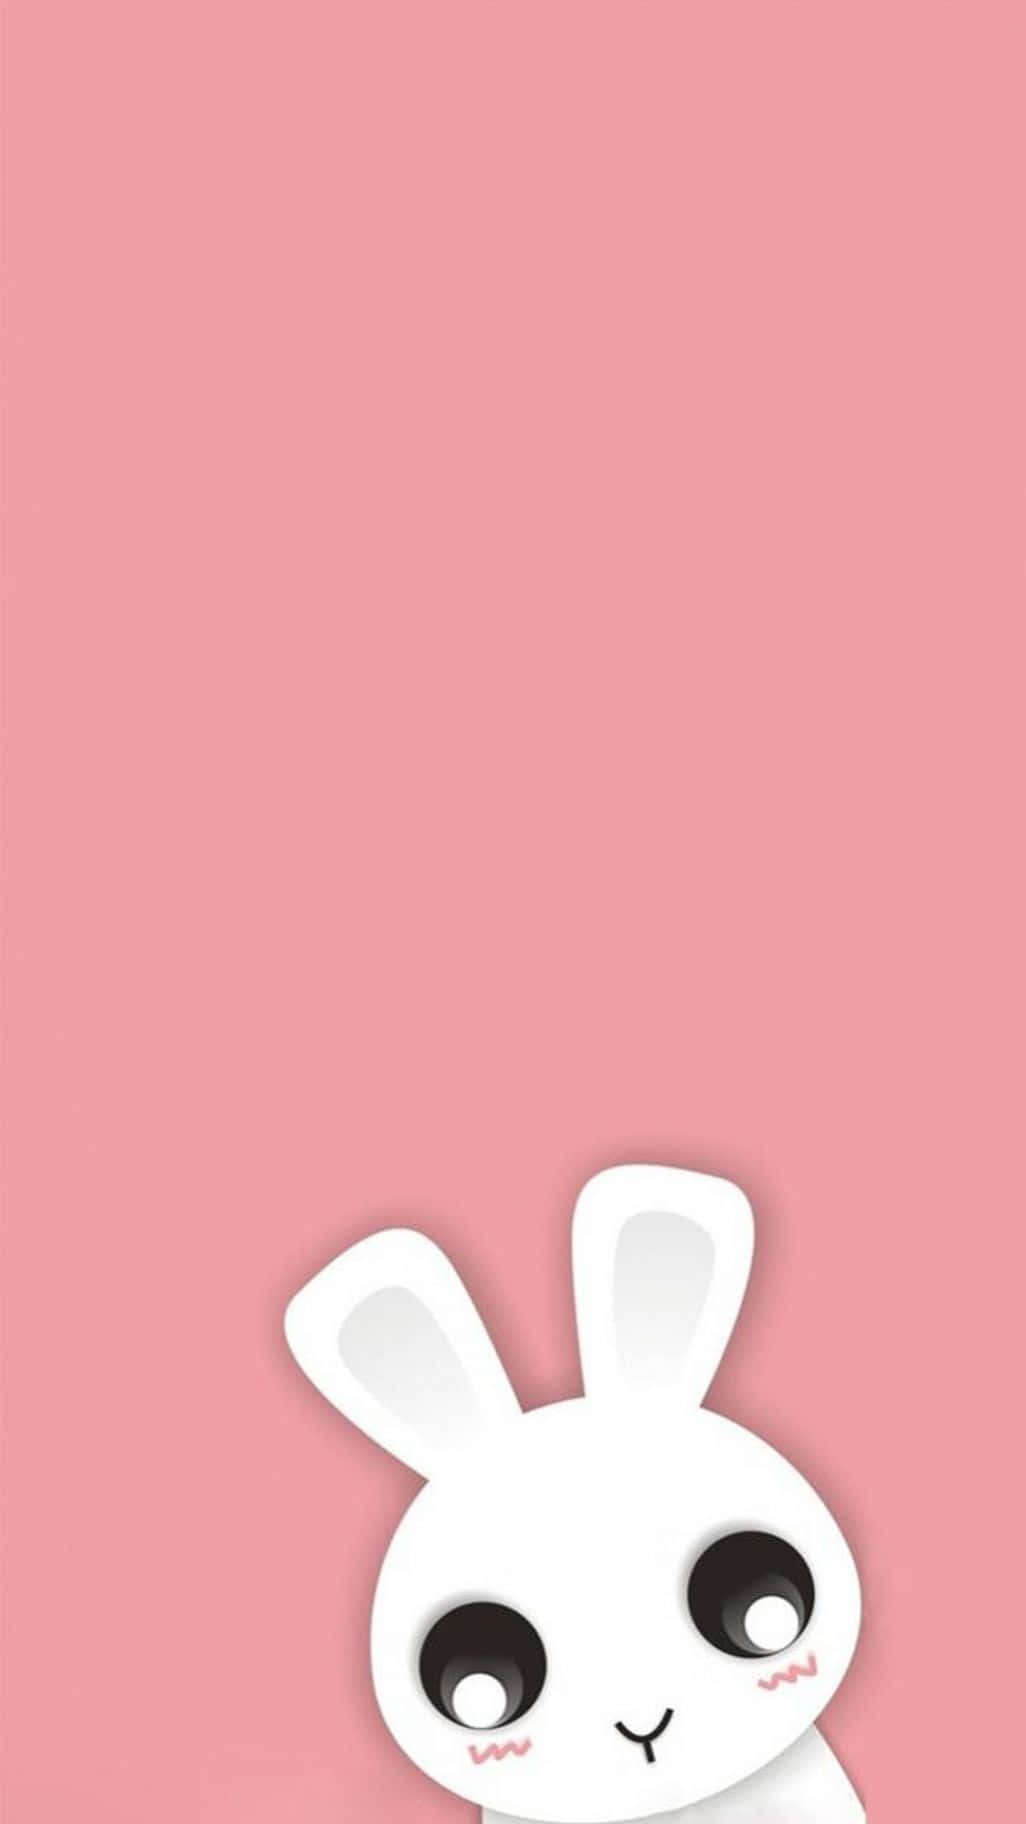 Capture the Moment with this Cute Bunny and Your Iphone! Wallpaper